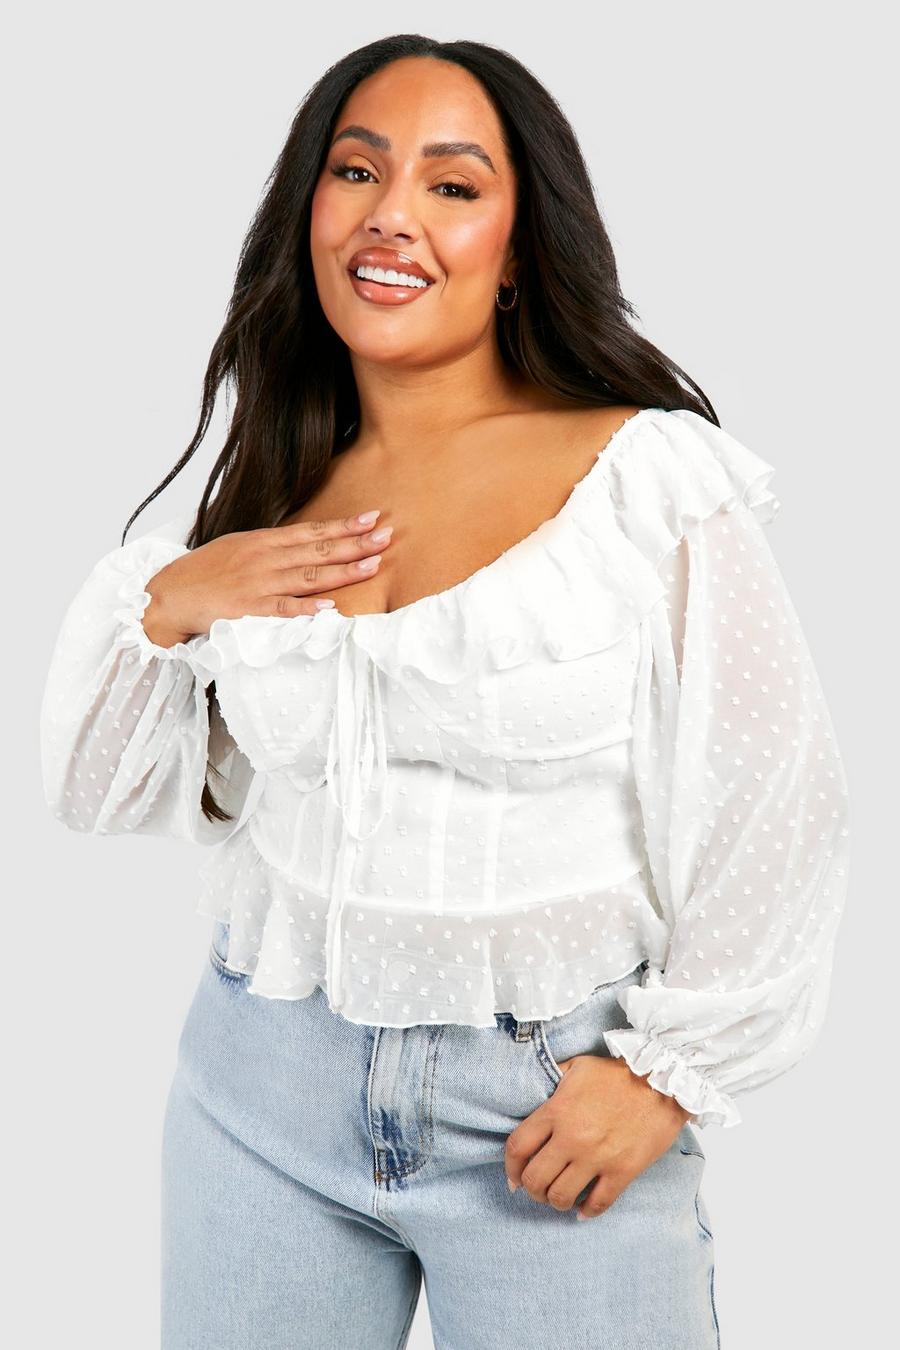 theRebelinme Plus Size Women's White Solid Color Smocked Sheer Peplum Top